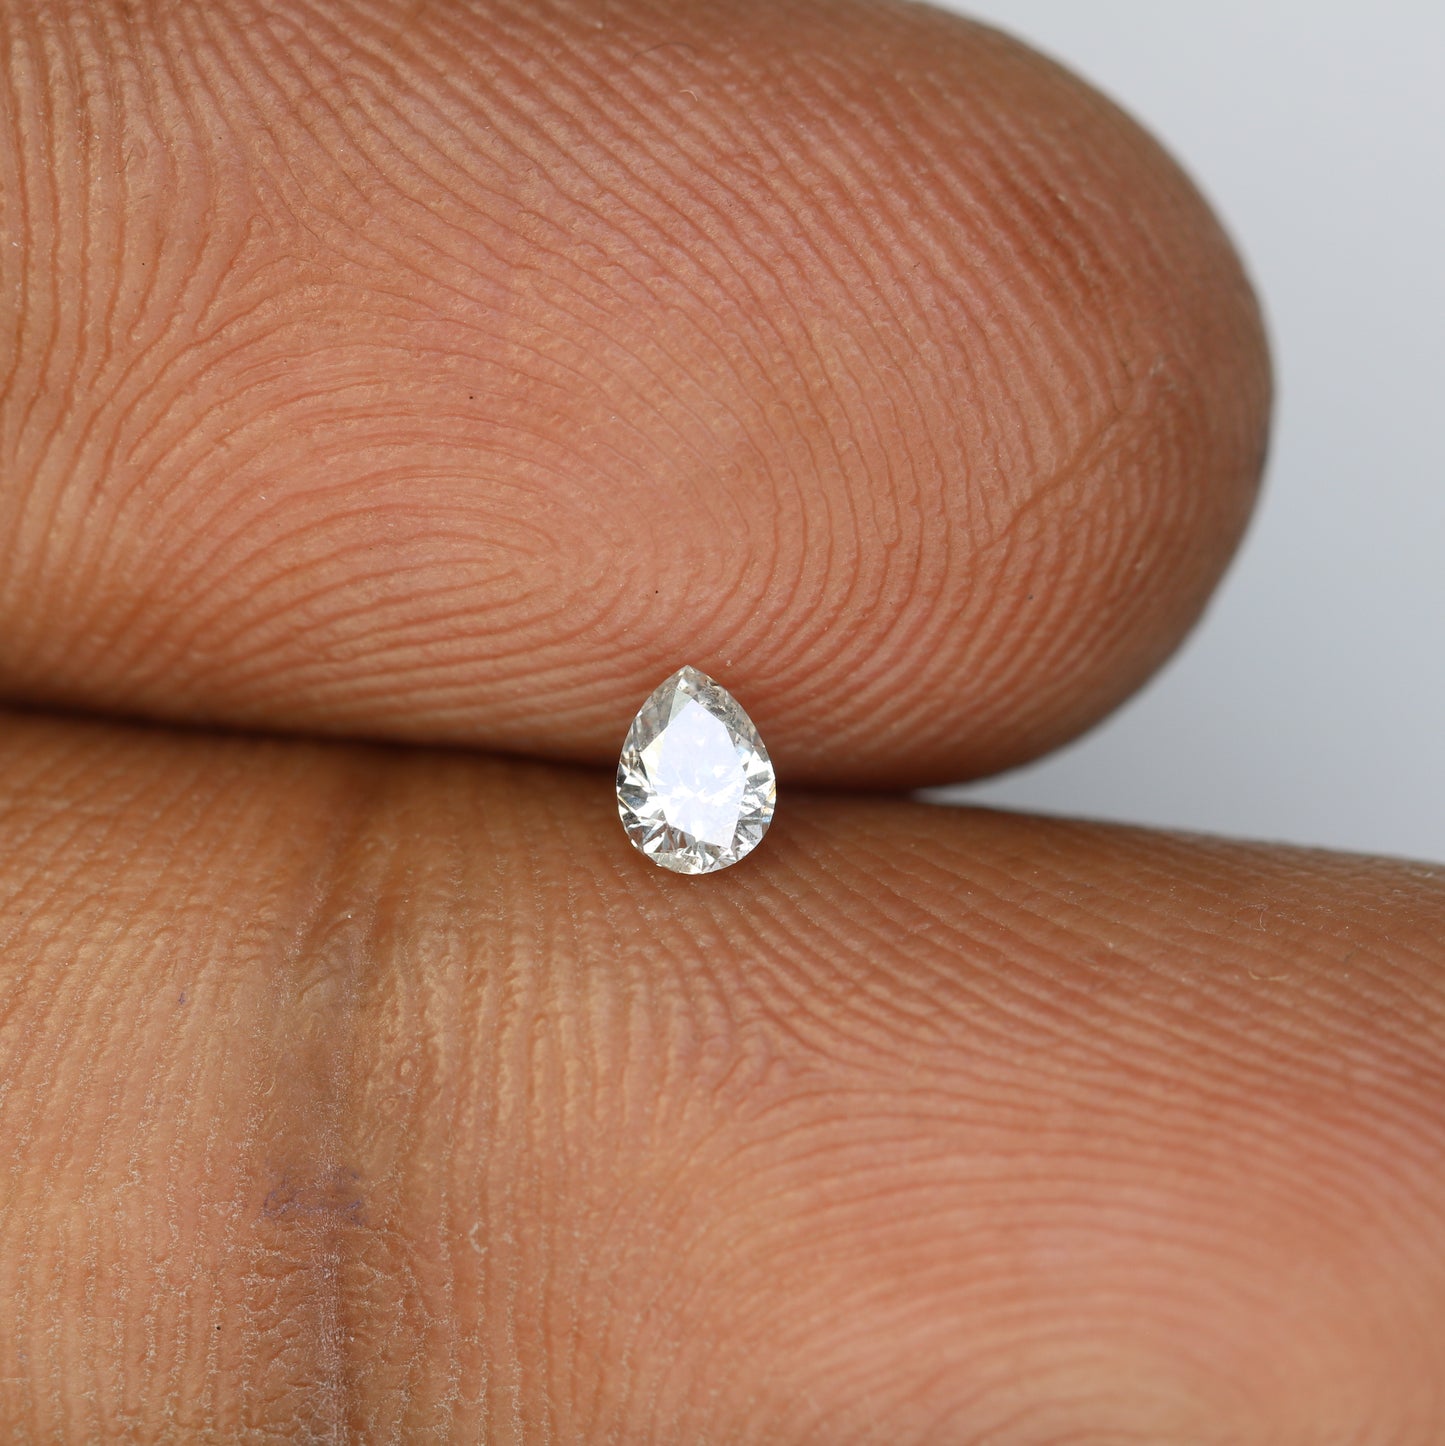 0.17 CT Pear Shape Salt And Pepper Diamond For Engagement Ring